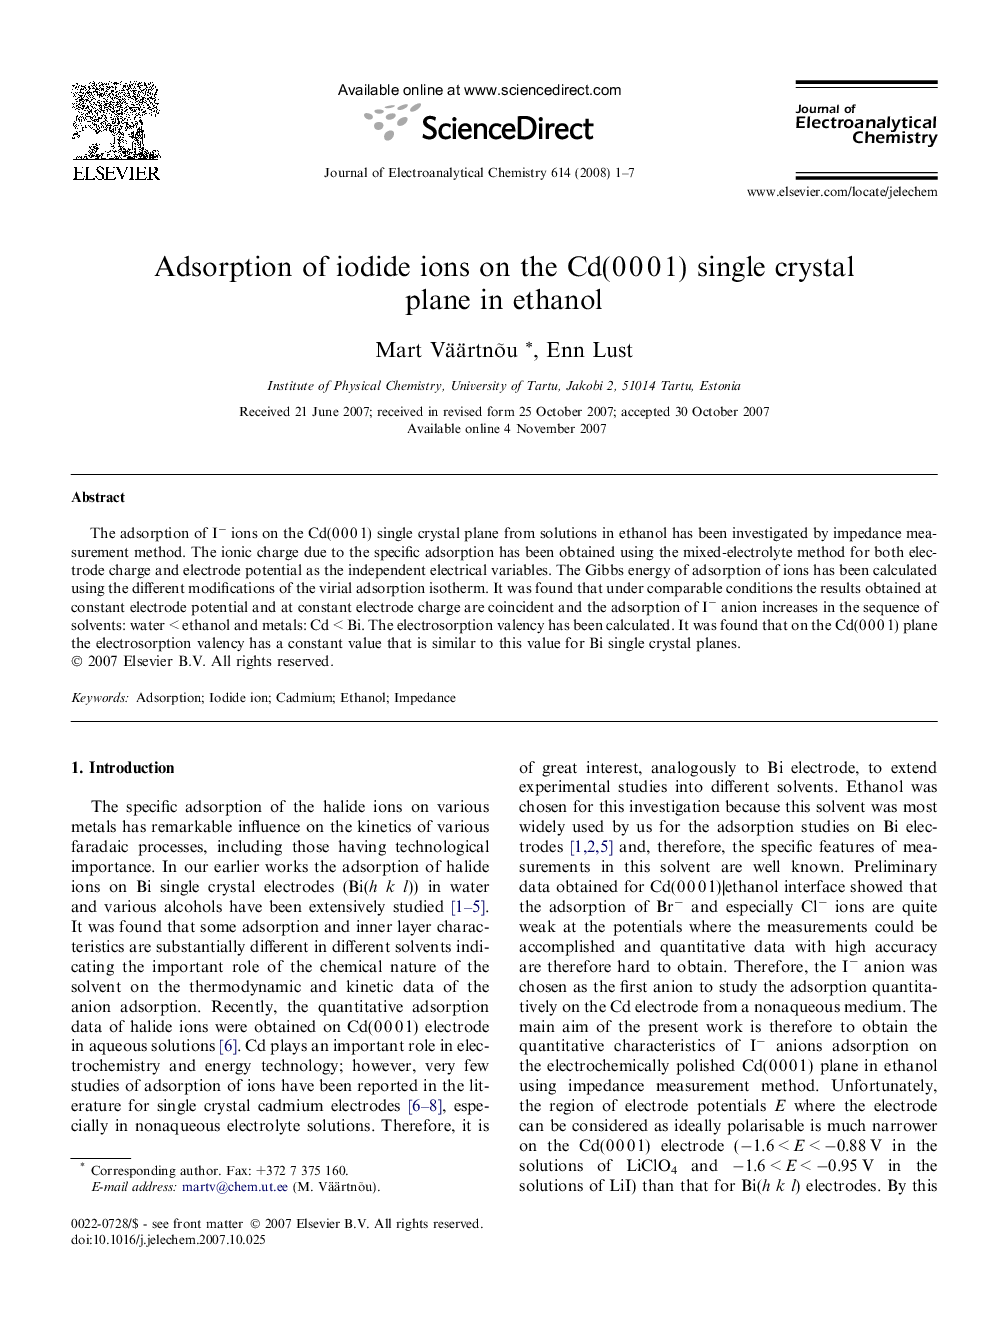 Adsorption of iodide ions on the Cd(0 0 0 1) single crystal plane in ethanol